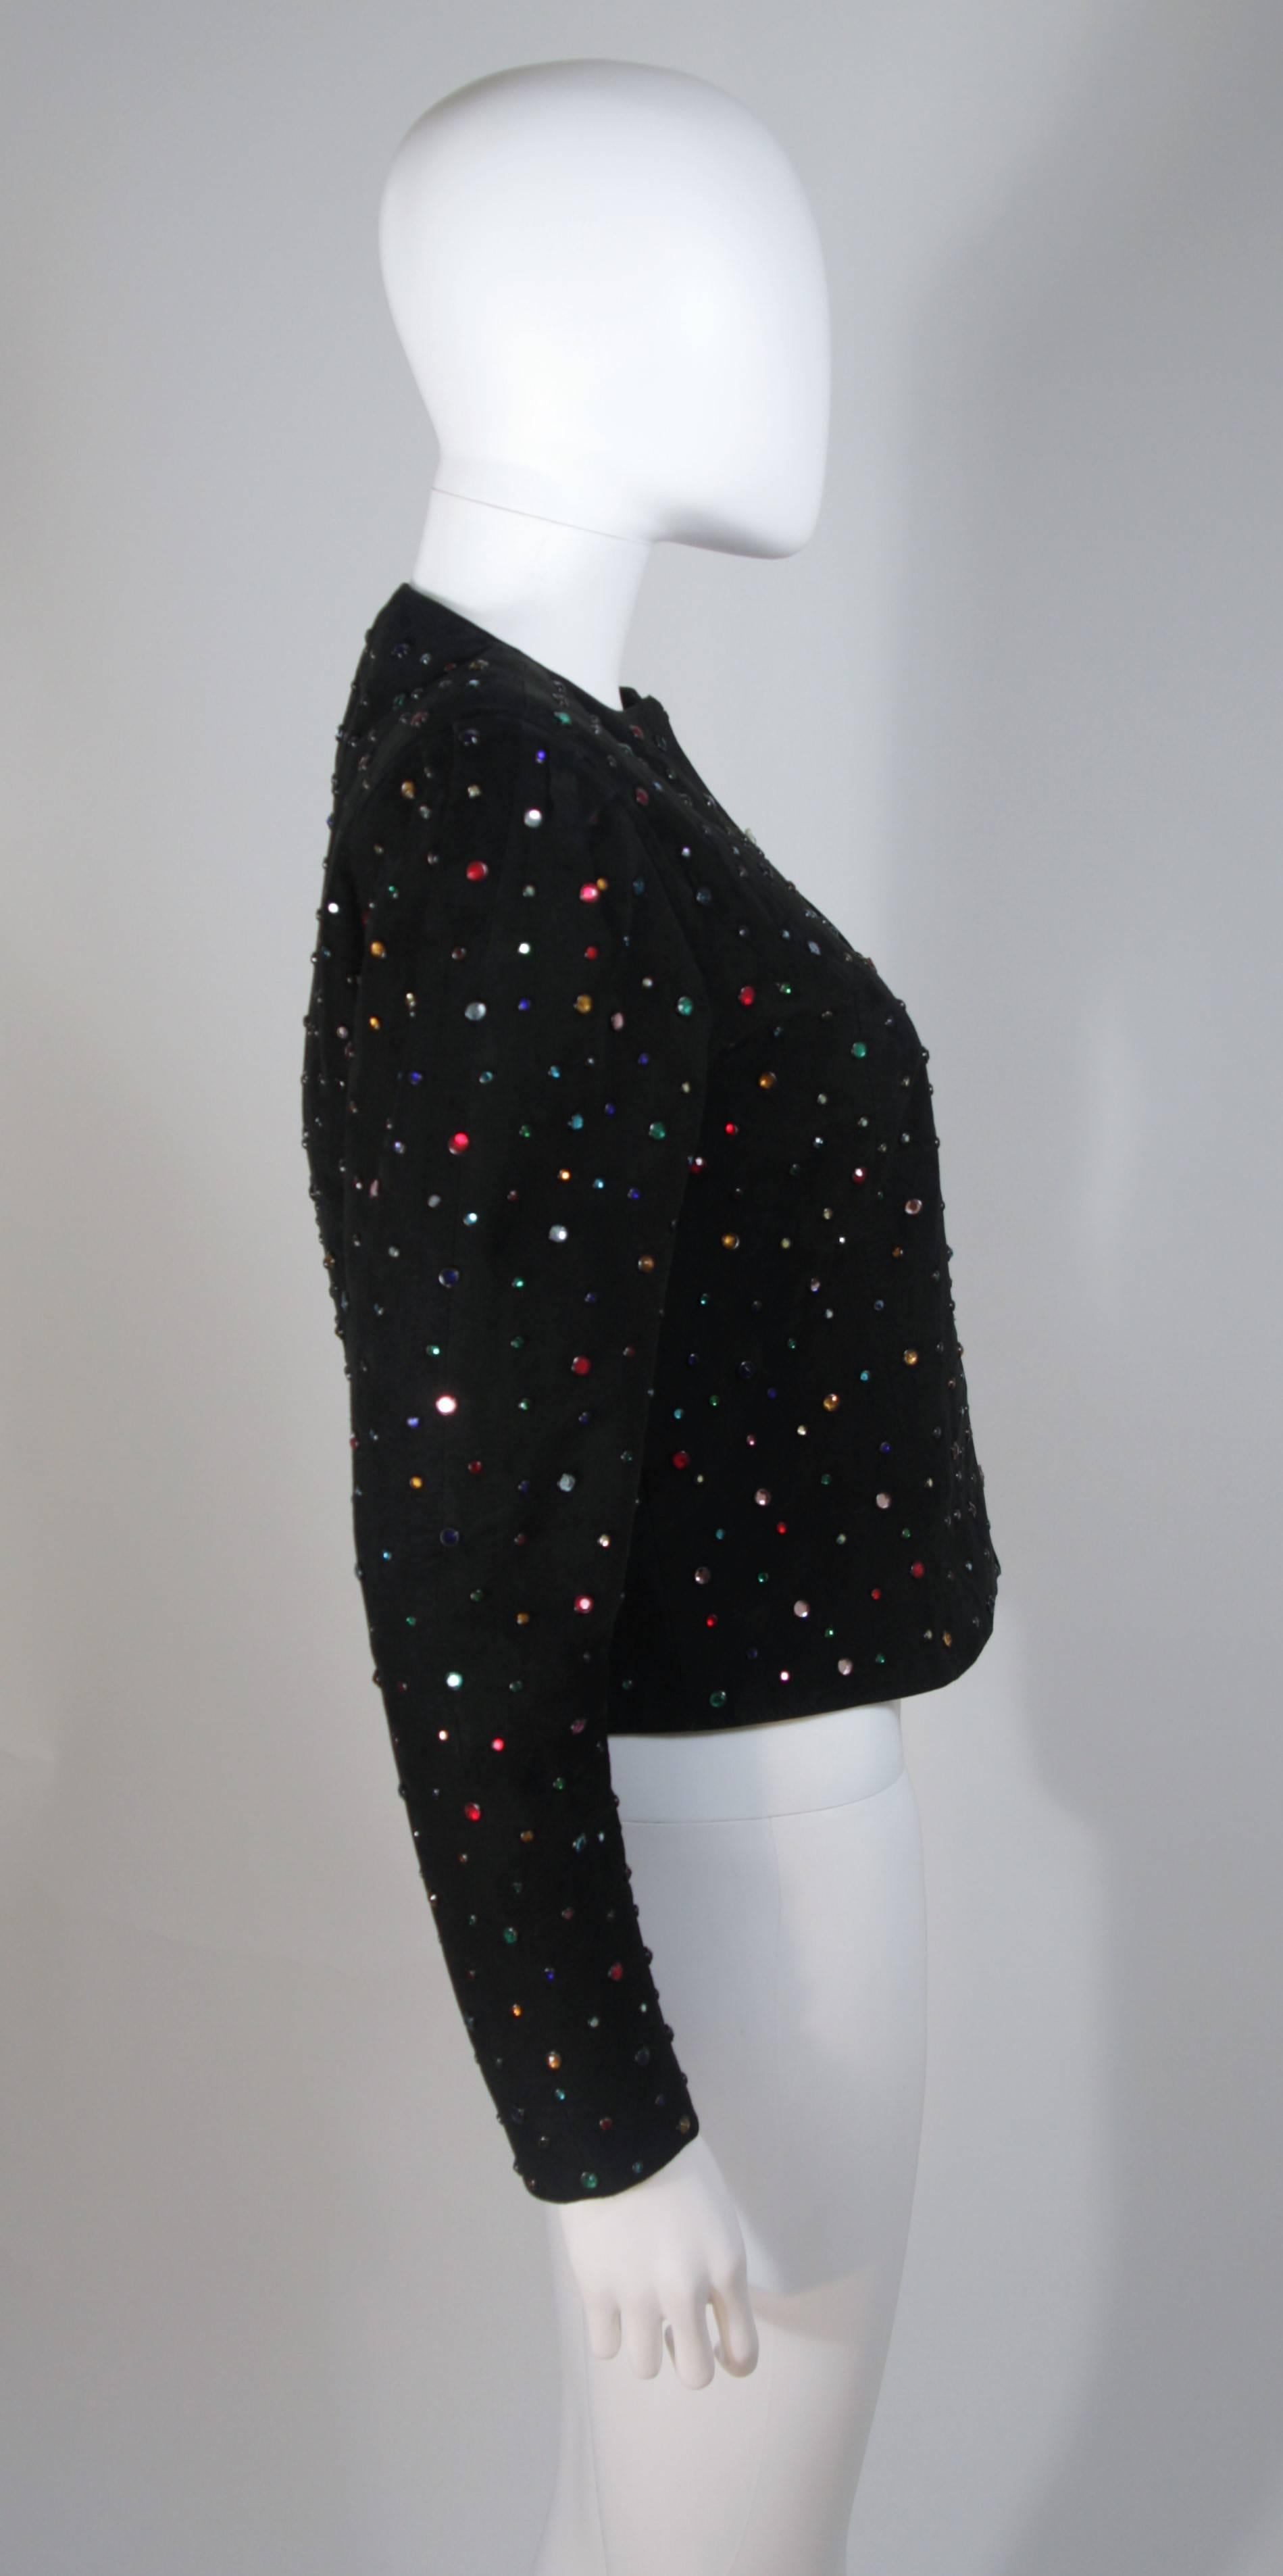 Black Suede Rhinestone Adorned Jacket Size Medium In Excellent Condition For Sale In Los Angeles, CA